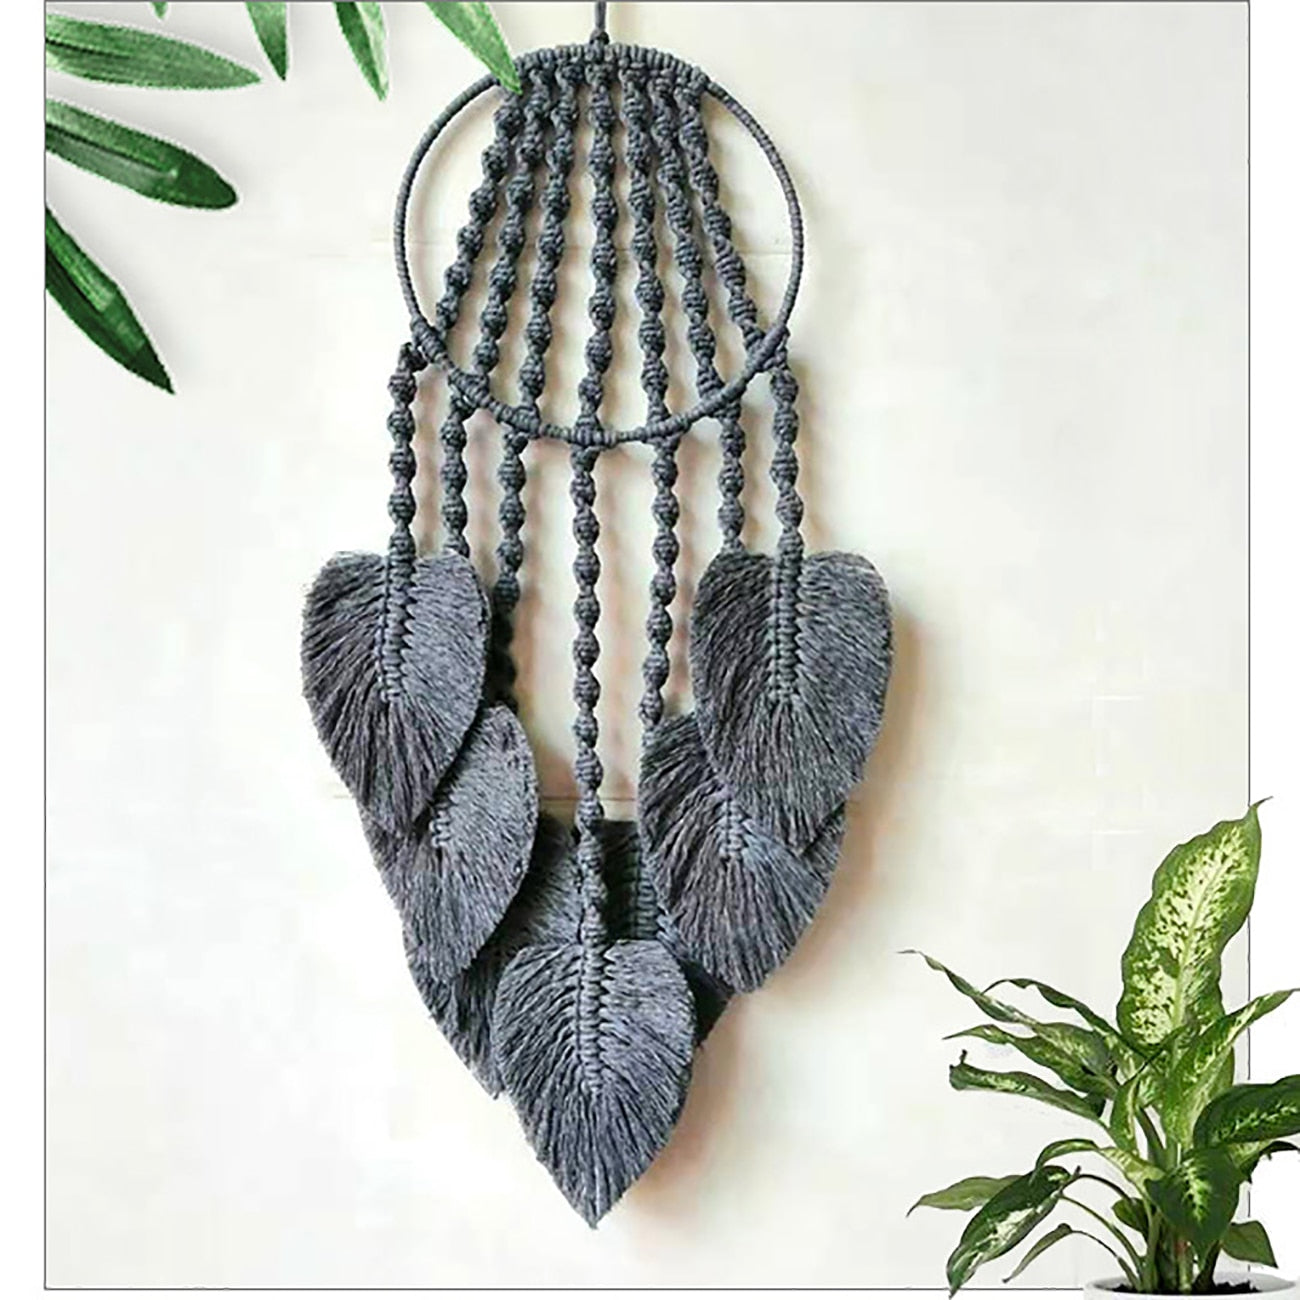 Macrame Wall Hanging Leaf Tapestry Nordic Bohemian Tassel Cotton Rope Tapestries Home Living Room Bedroom Headboard Decoration